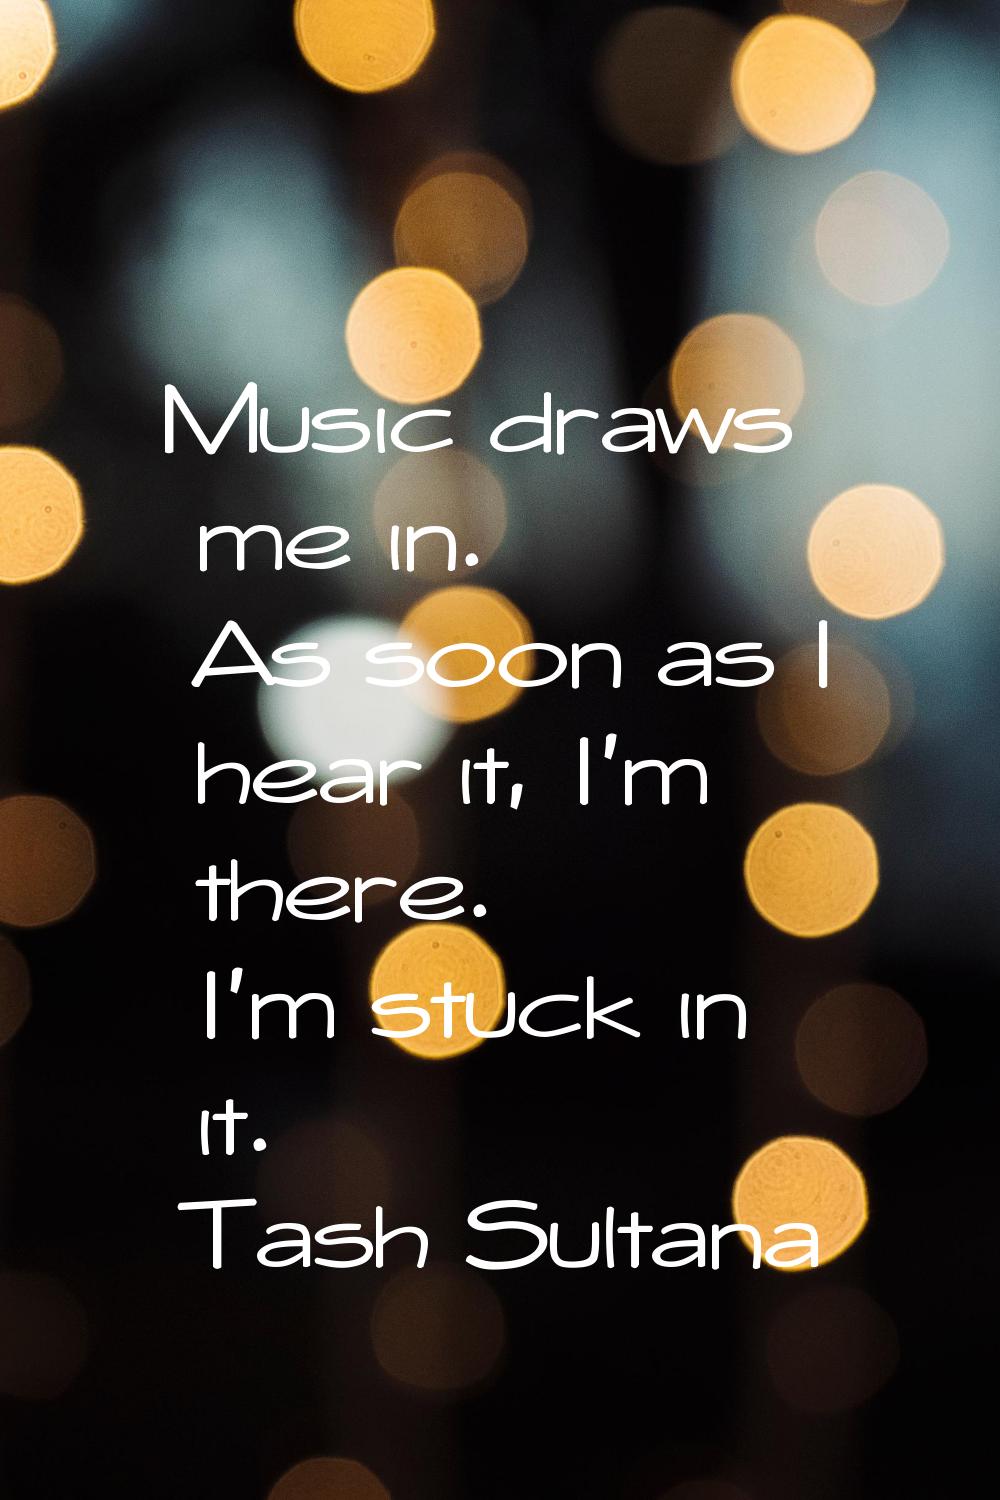 Music draws me in. As soon as I hear it, I'm there. I'm stuck in it.